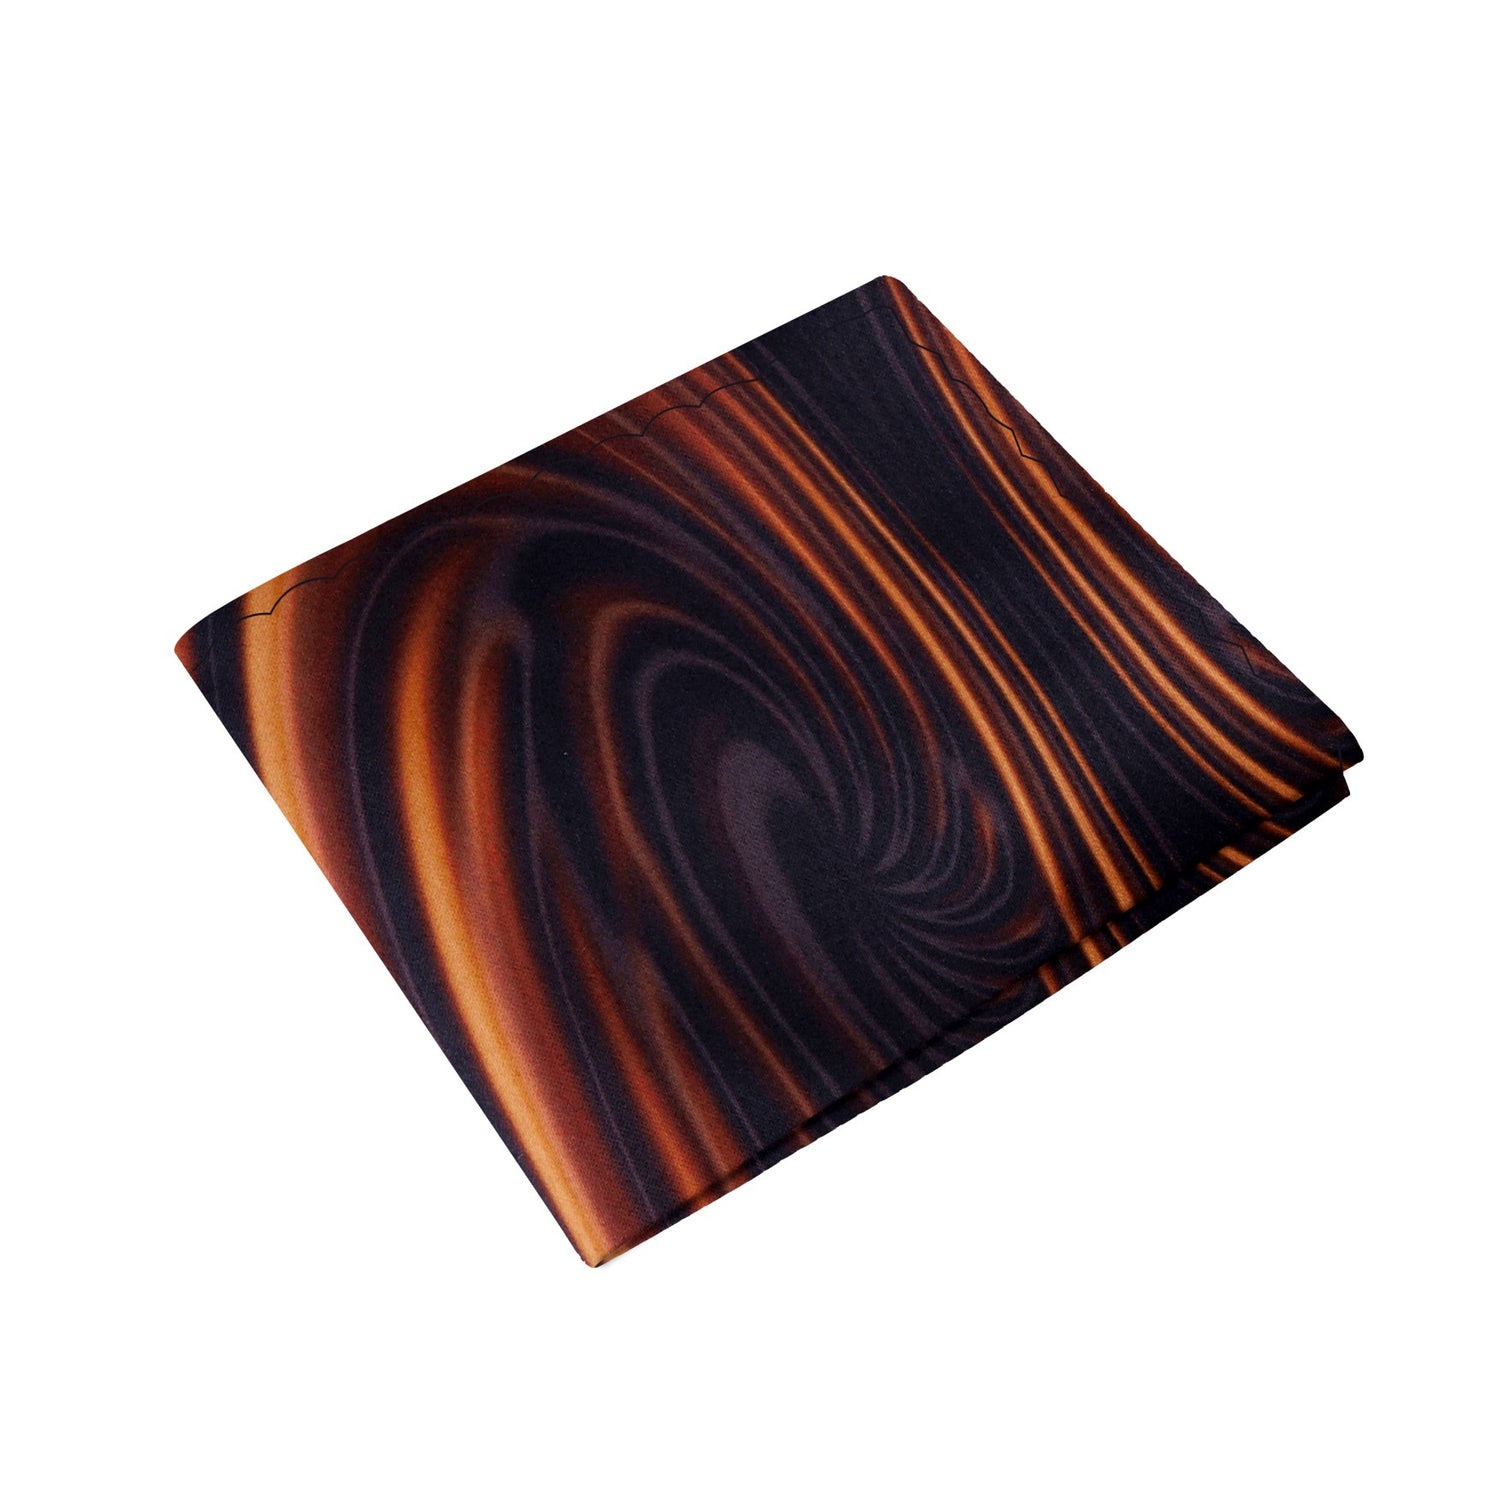 View 2: A Brown and Dark Brown Color Chocolate Swirl Pattern Pocket Square